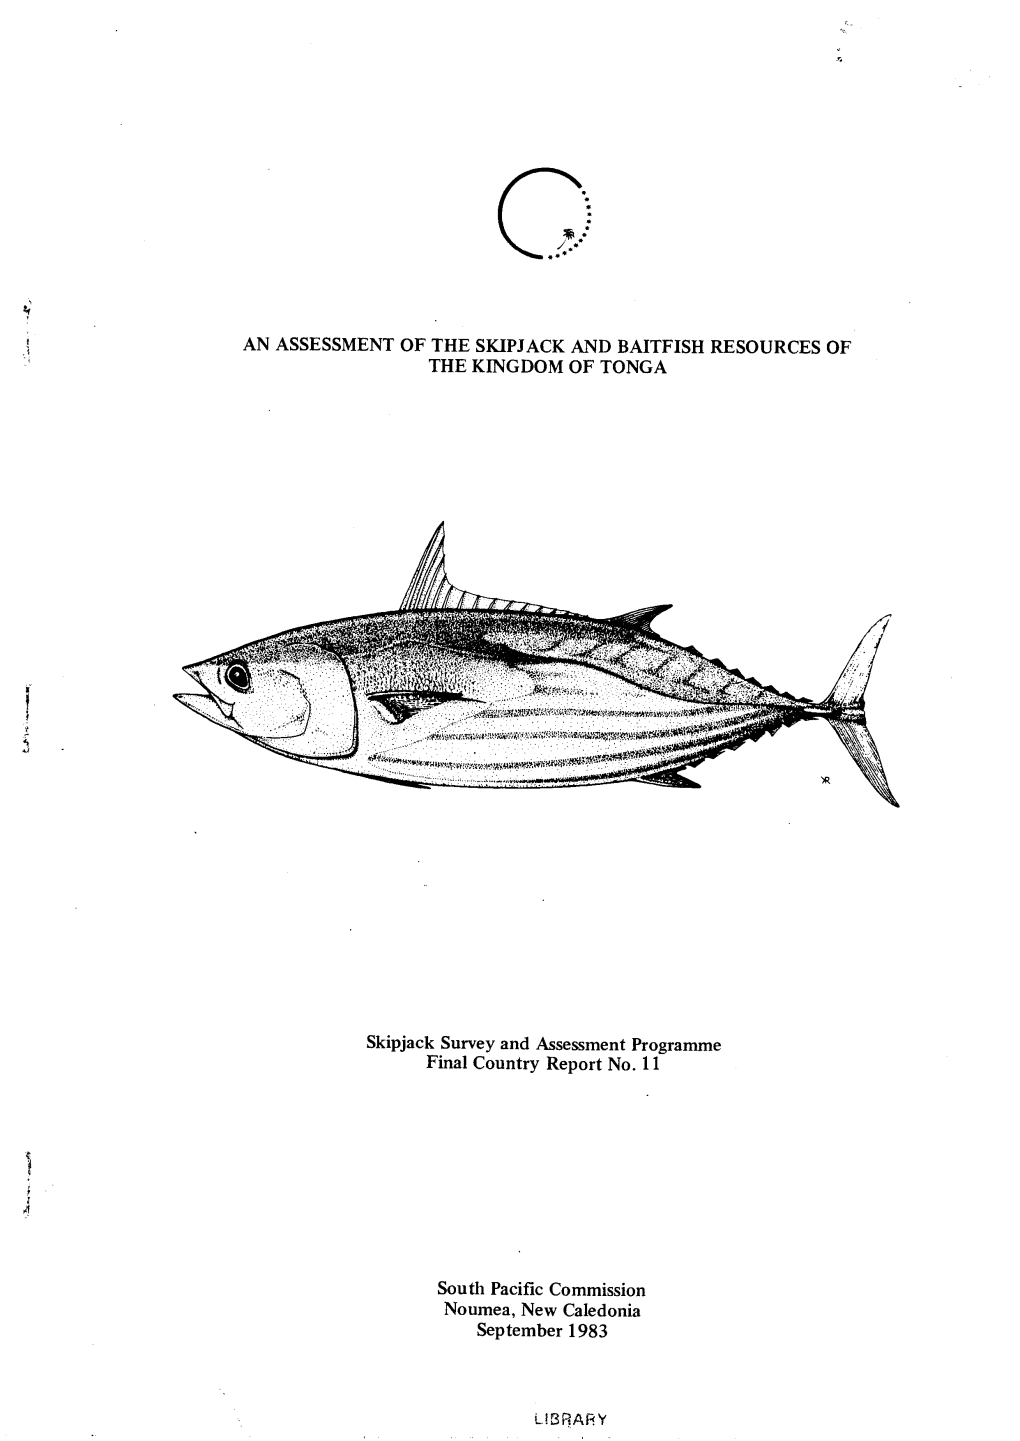 An Assessment of the Skipjack and Baitfish Resources of the Kingdom of Tonga